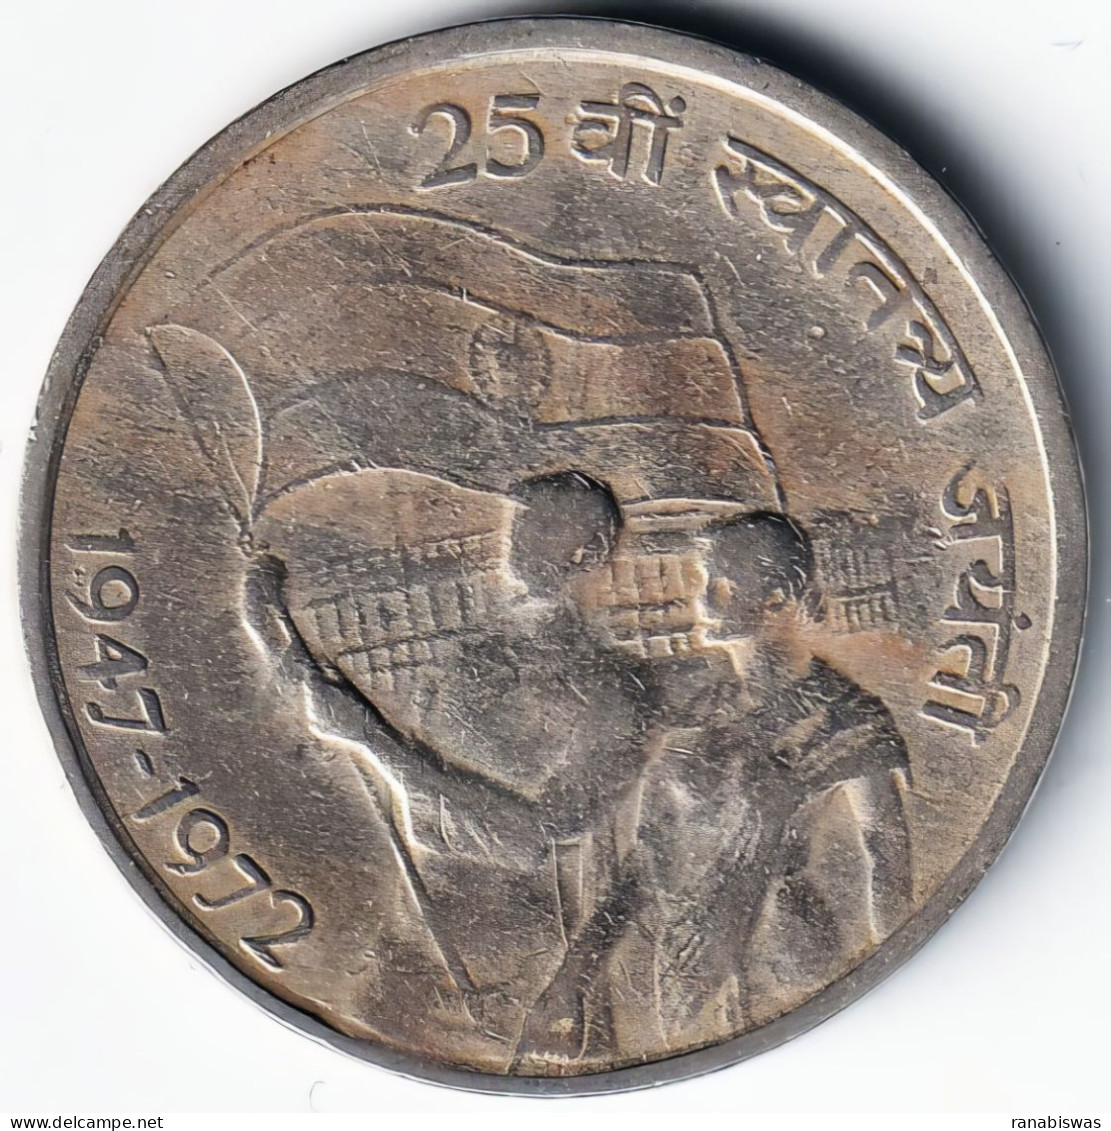 INDIA COIN LOT 102, 50 PAISE 1972, INDEPENDENCE, CALCITTA MINT, XF - Inde